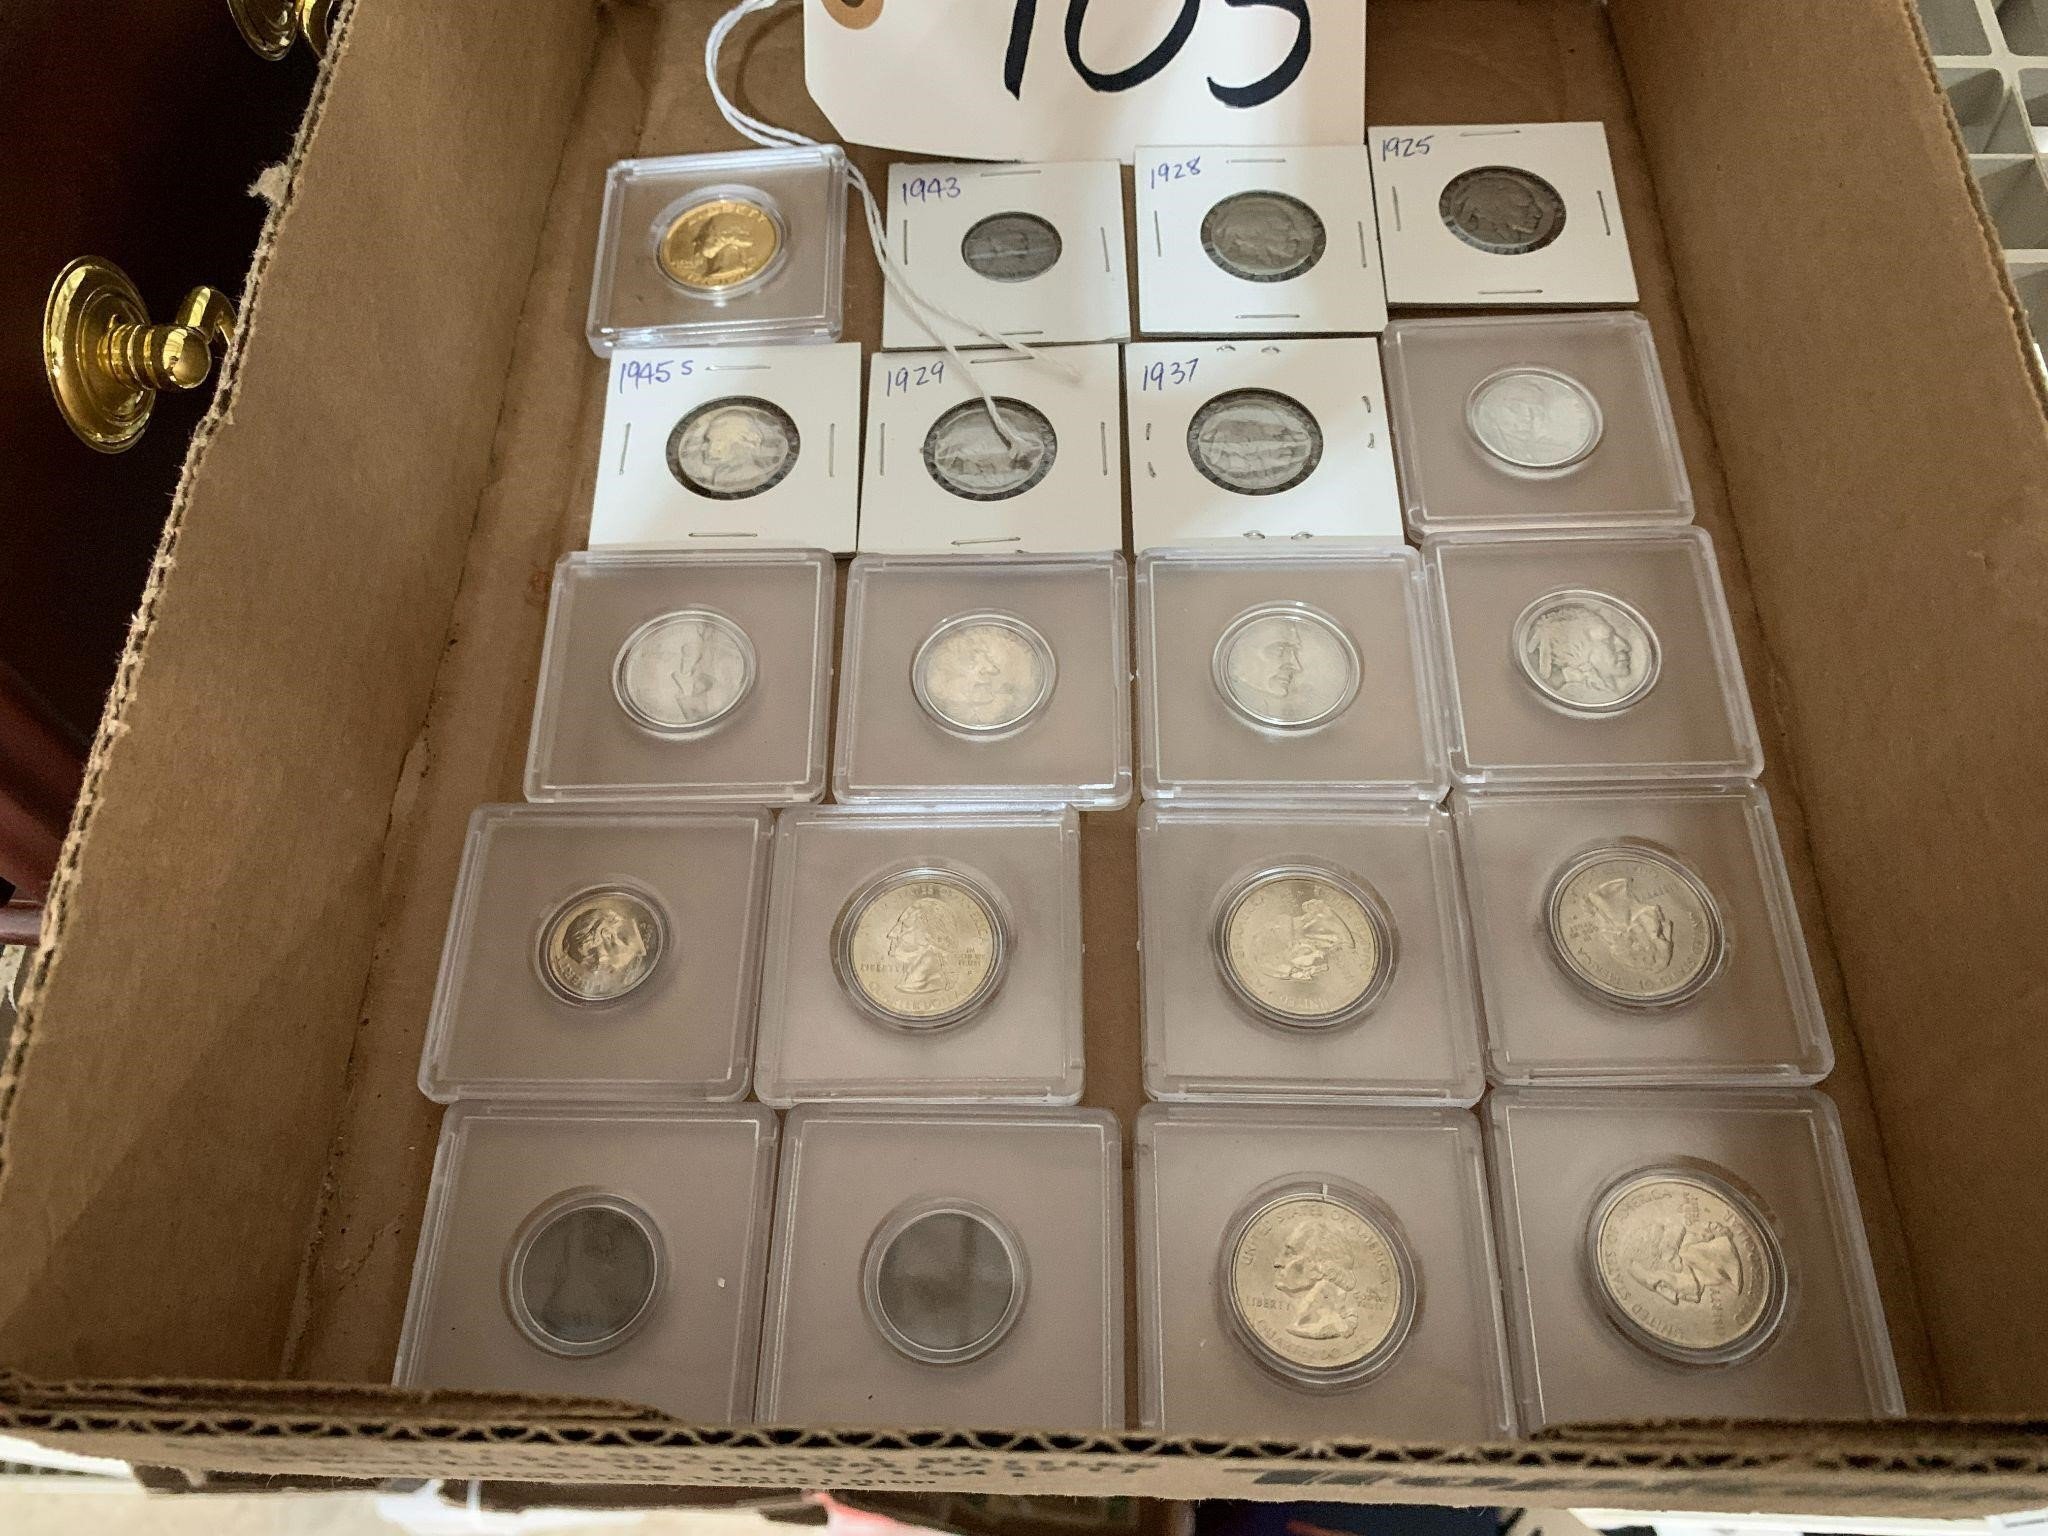 Collector Coins(Quarters, Nickels, Dimes, Pennies)